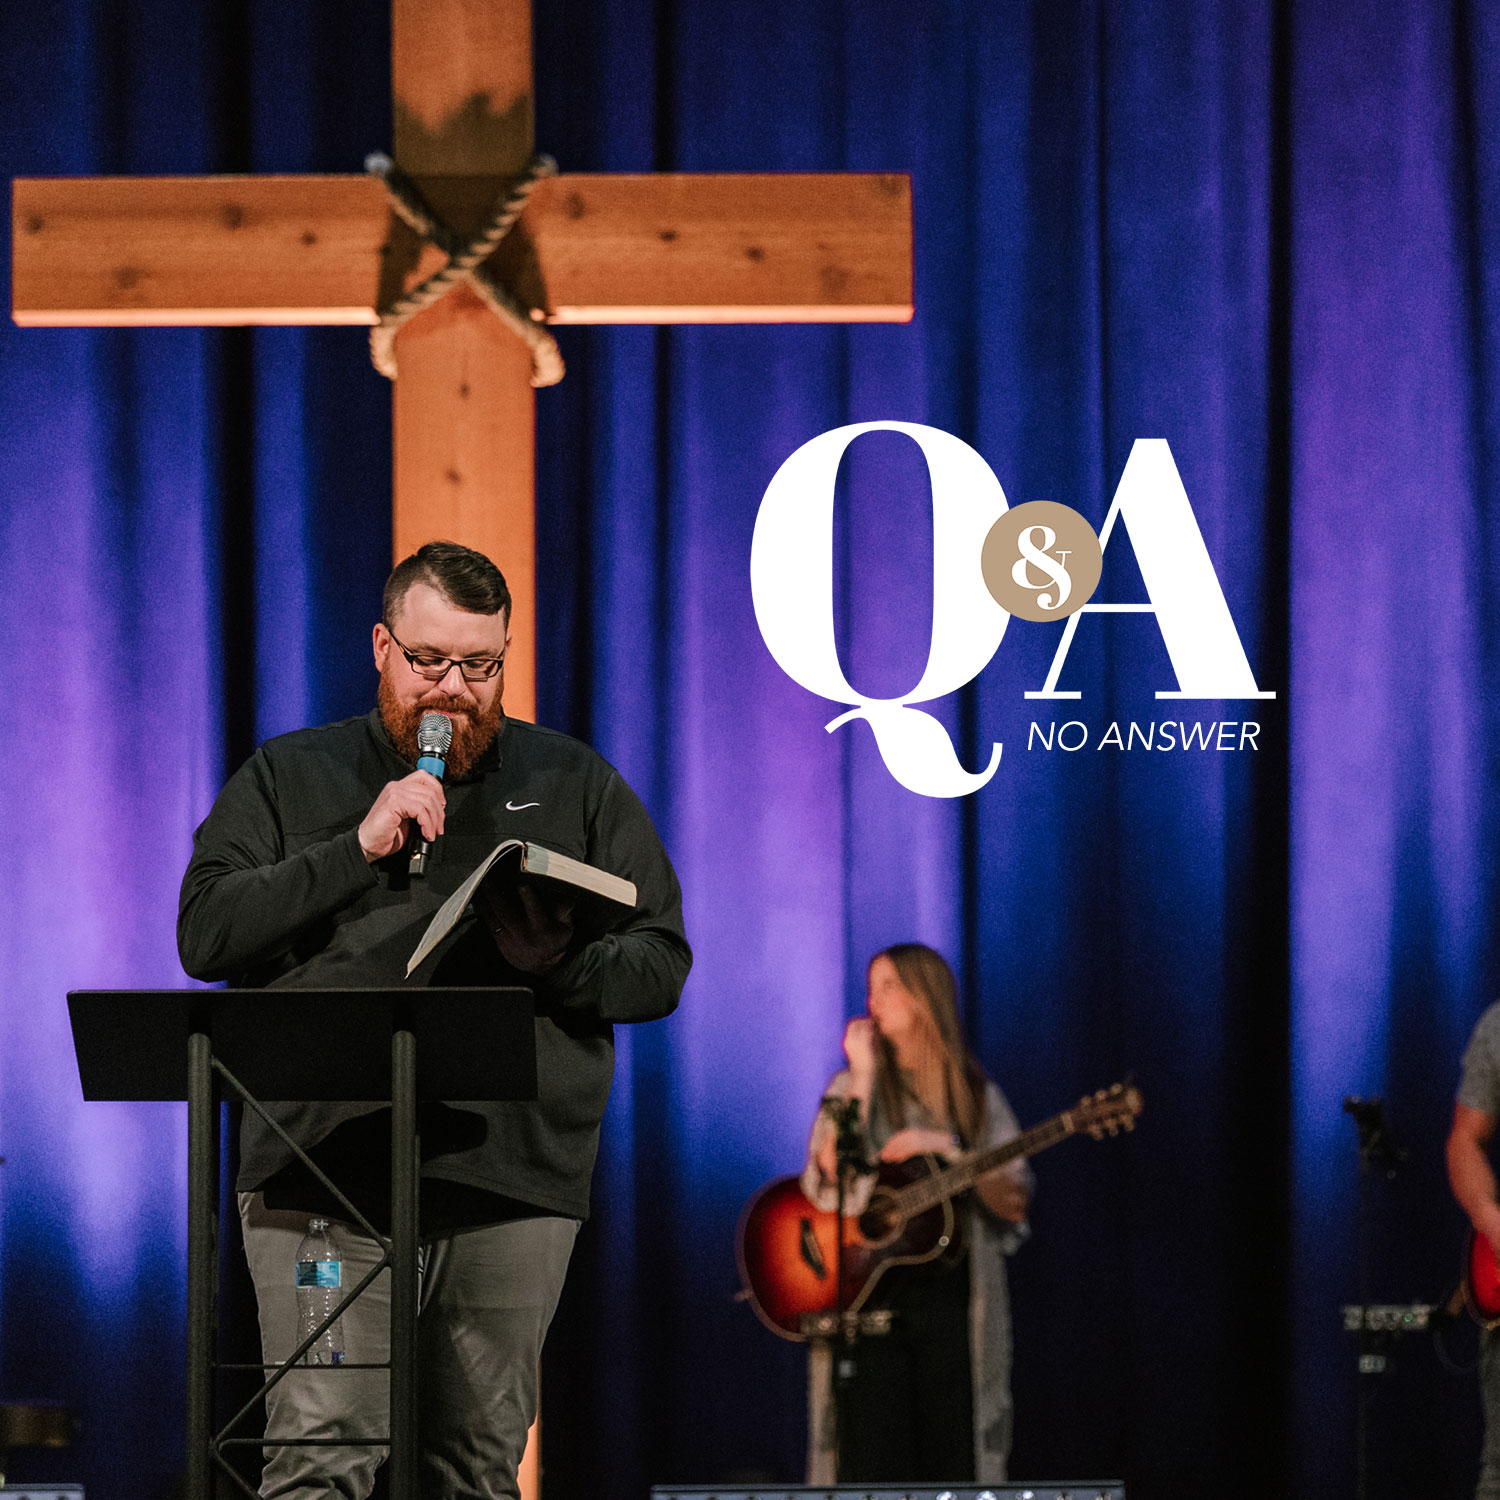 Q&A: "No Answer" [Pastor Andrew Heller]